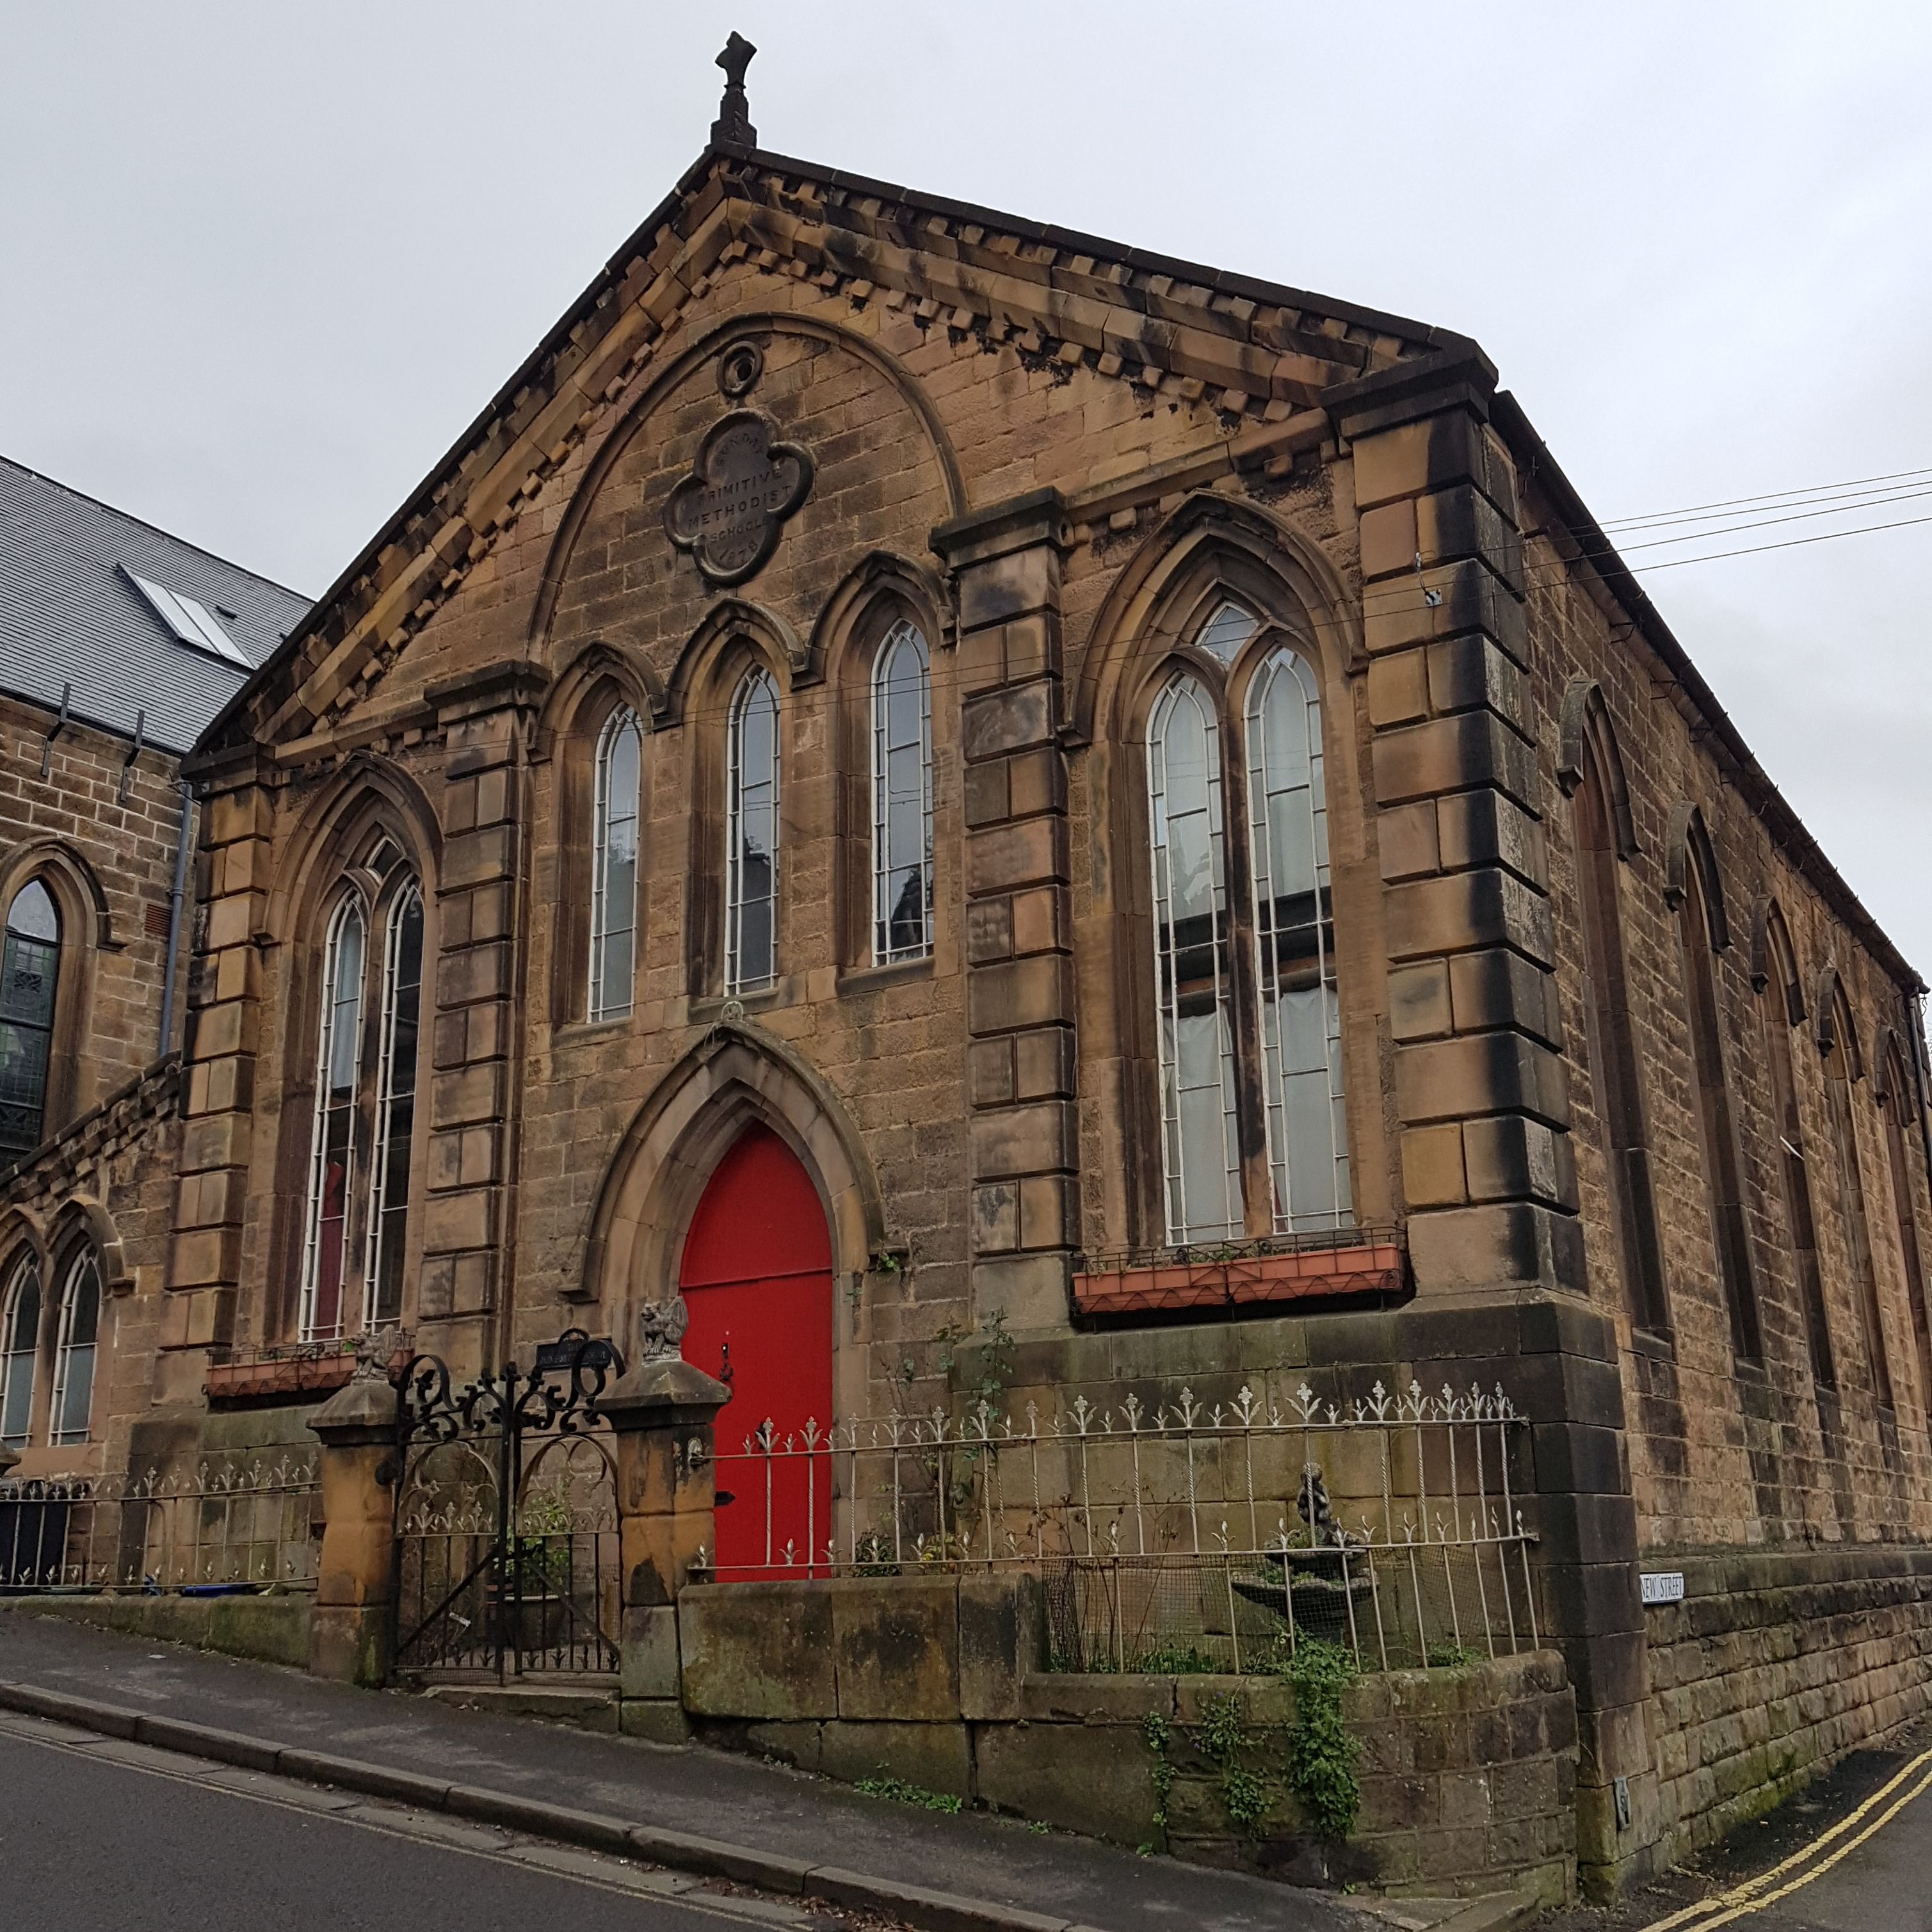 Planning permission granted for Old Sunday School loft conversion in Matlock